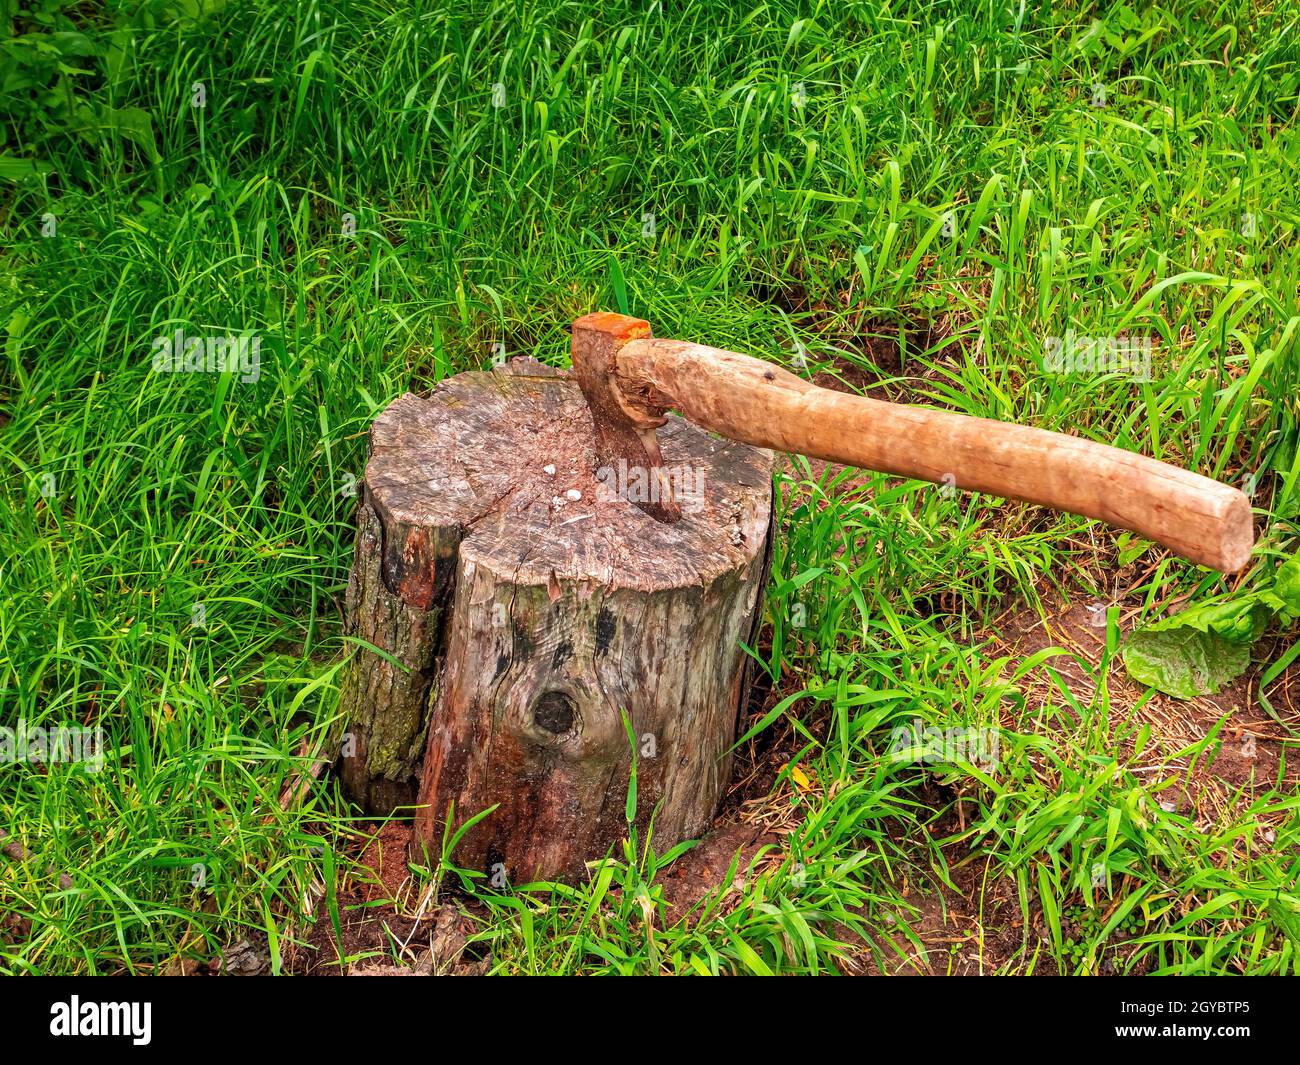 Ax for cutting wood in a tree stump. Lumberjack's ax. Chop wood. Wooden stump. Green grass. Logging. Protection of Nature. Ecological catastrophy. Def Stock Photo